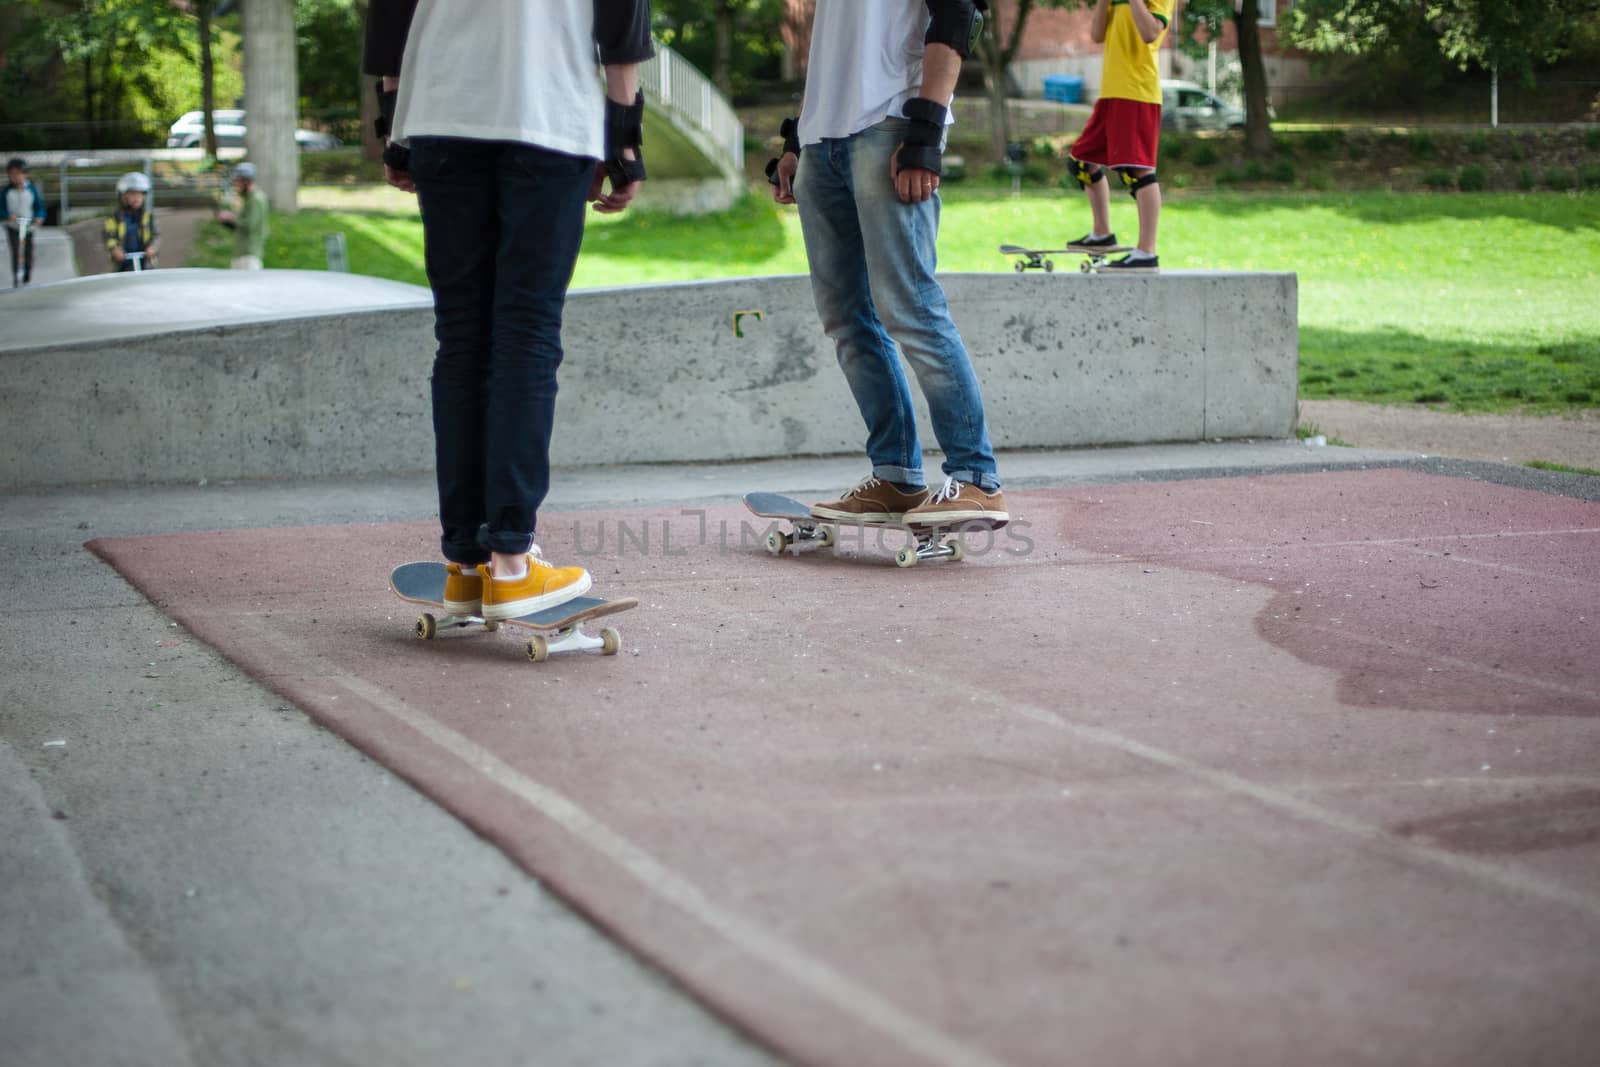 Powerful funny young guys are trained in a skate park Stockholm, Sweden. Leisure, playing, trick